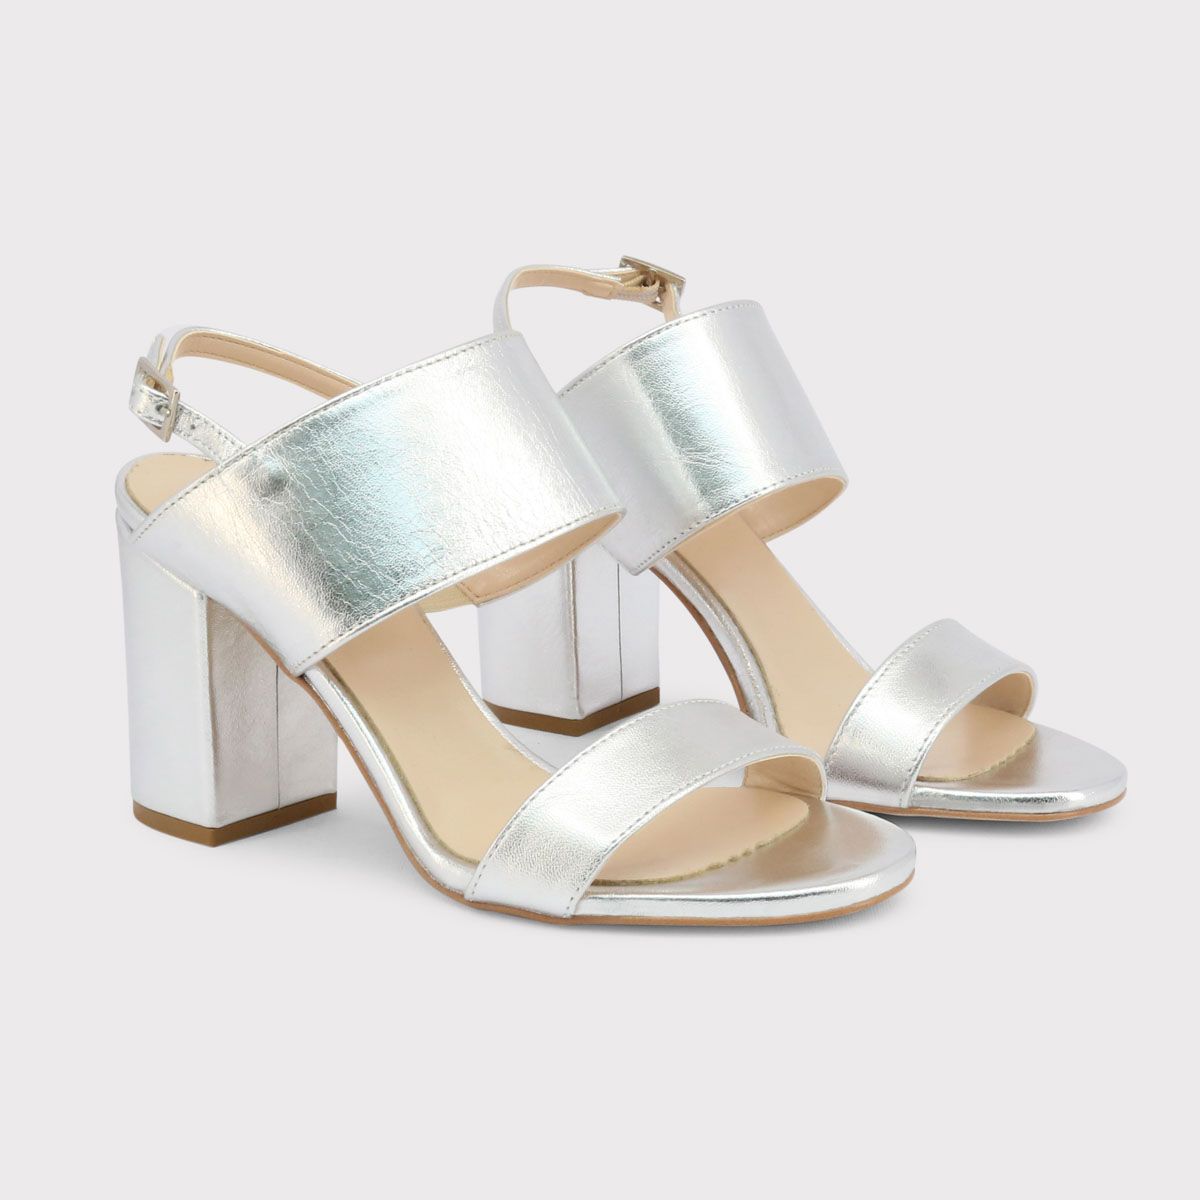 Made in: Italy <br> Collection: Spring/Summer <br> Gender: Woman <br> Type: Sandals <br> Upper: leather <br> Insole: leather <br> Sole: tunit <br> Heel height cm: 9.5 <br> Platform height cm: undefined <br> Details: ankle strap, buckle